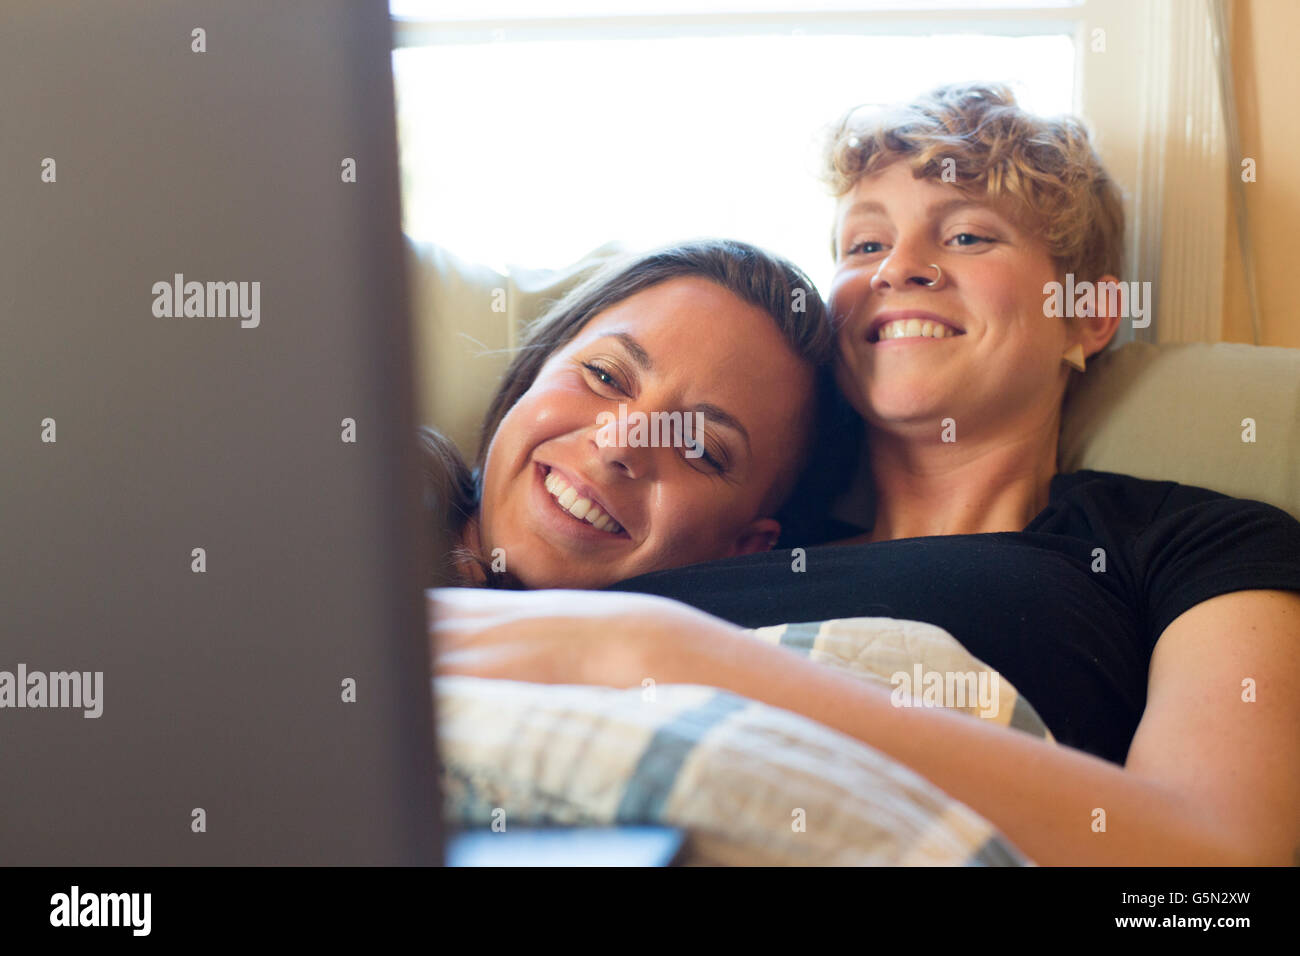 Caucasian lesbian couple cuddling in bed Stock Photo